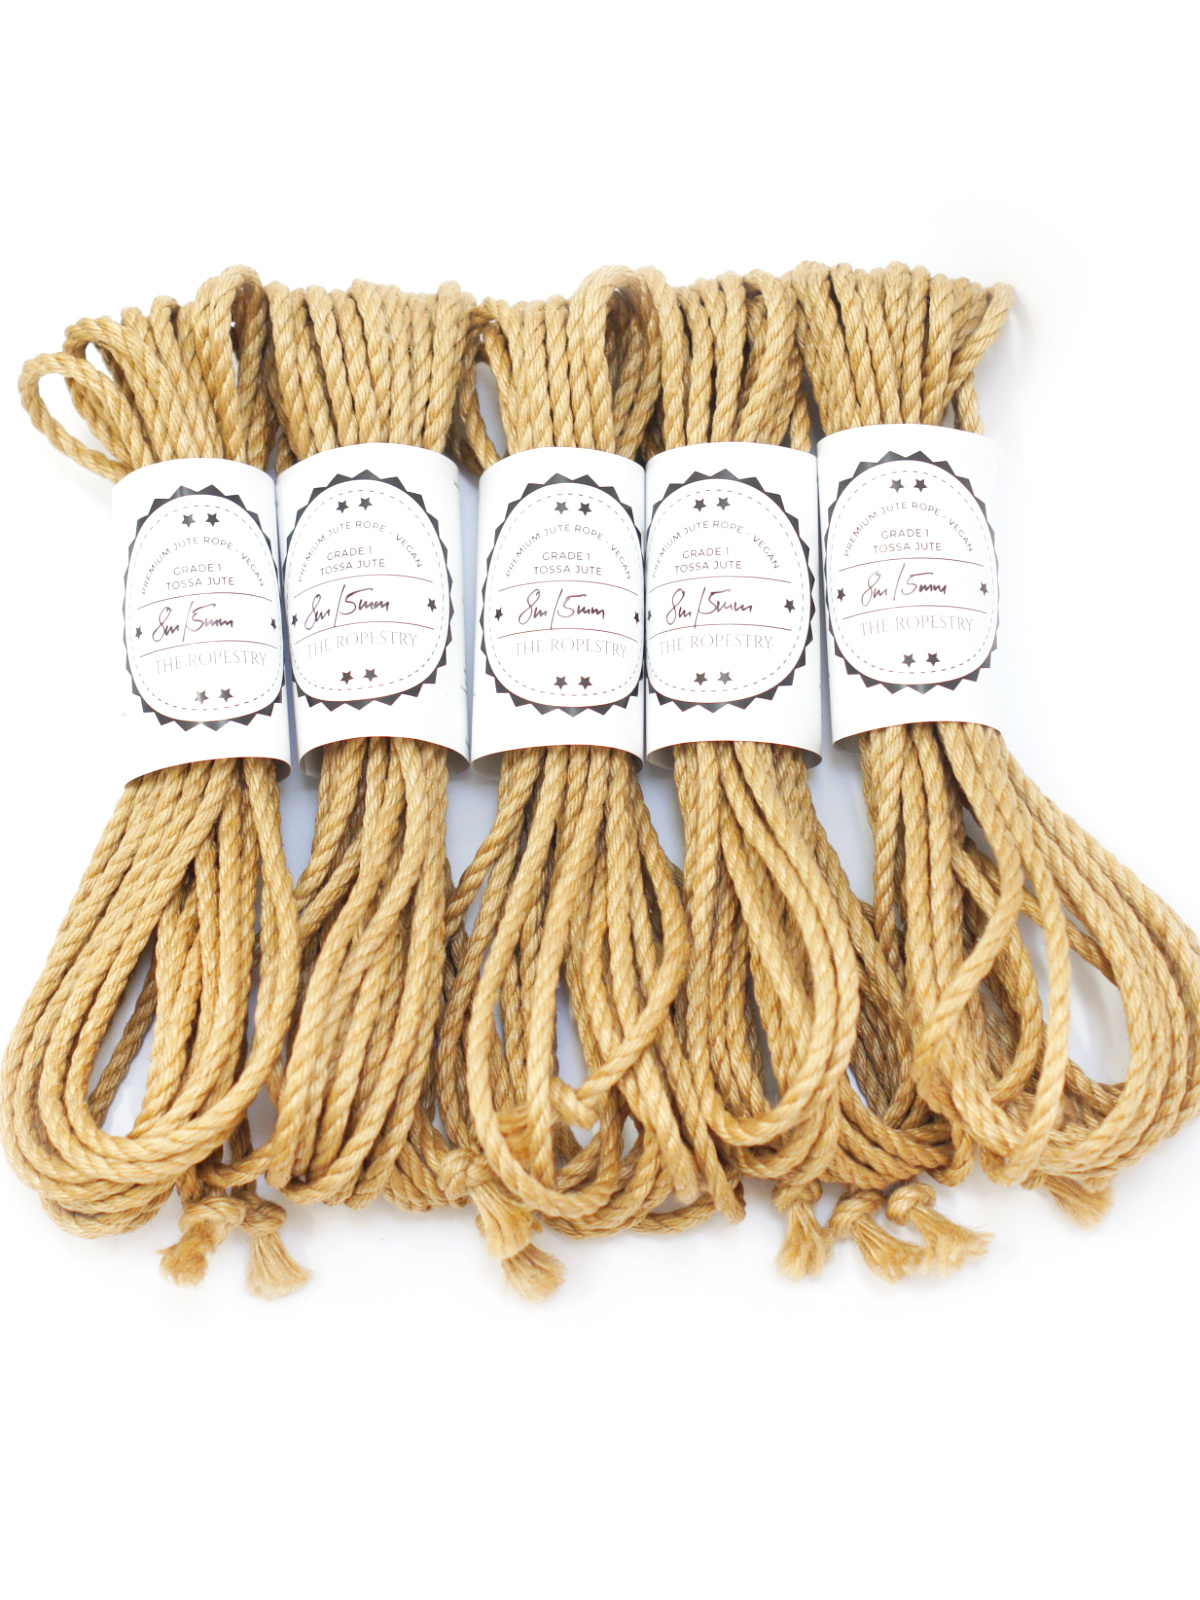 B-STOCK 5pc set, ∅ 5mm, 8m, jute rope, ready for use 